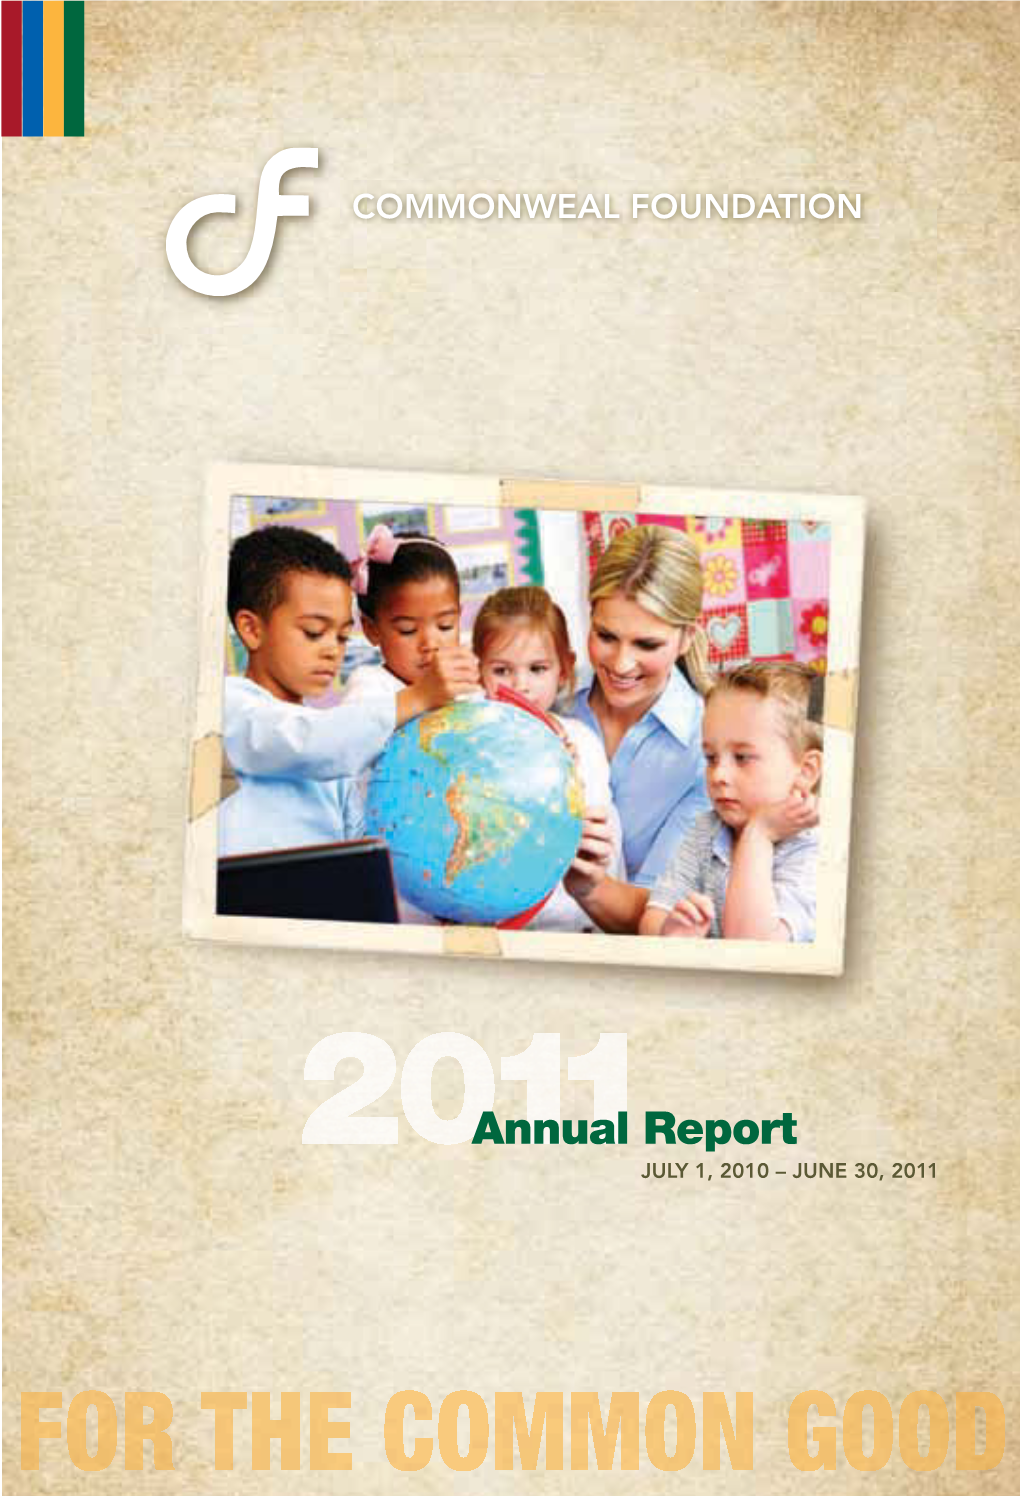 Annual Report JULY 1, 2010 – JUNE 30, 2011 | COMMONWEAL FOUNDATION 2011 ANNUAL REPORT | Letter from Chief Executive Officer and President